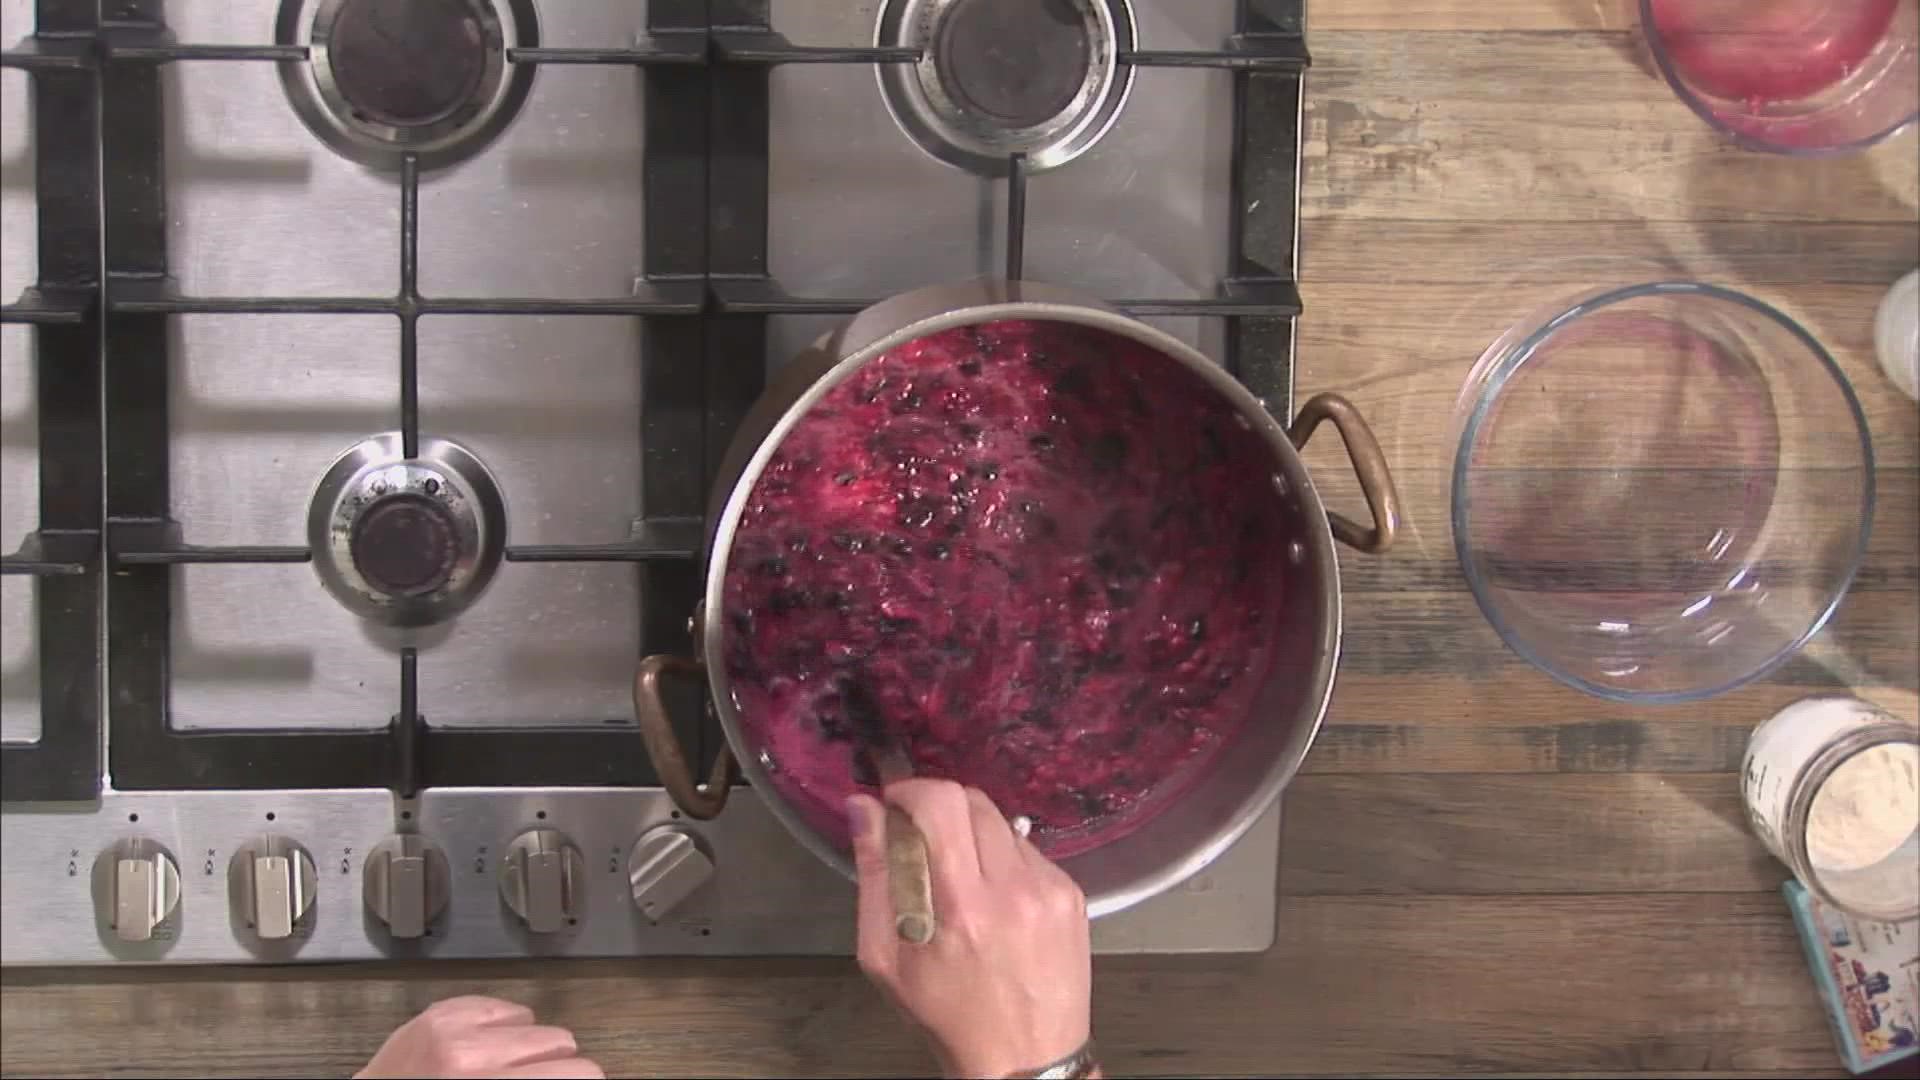 Allison Carroll Duffy shows us how to make a jam you can eat now or save for winter.